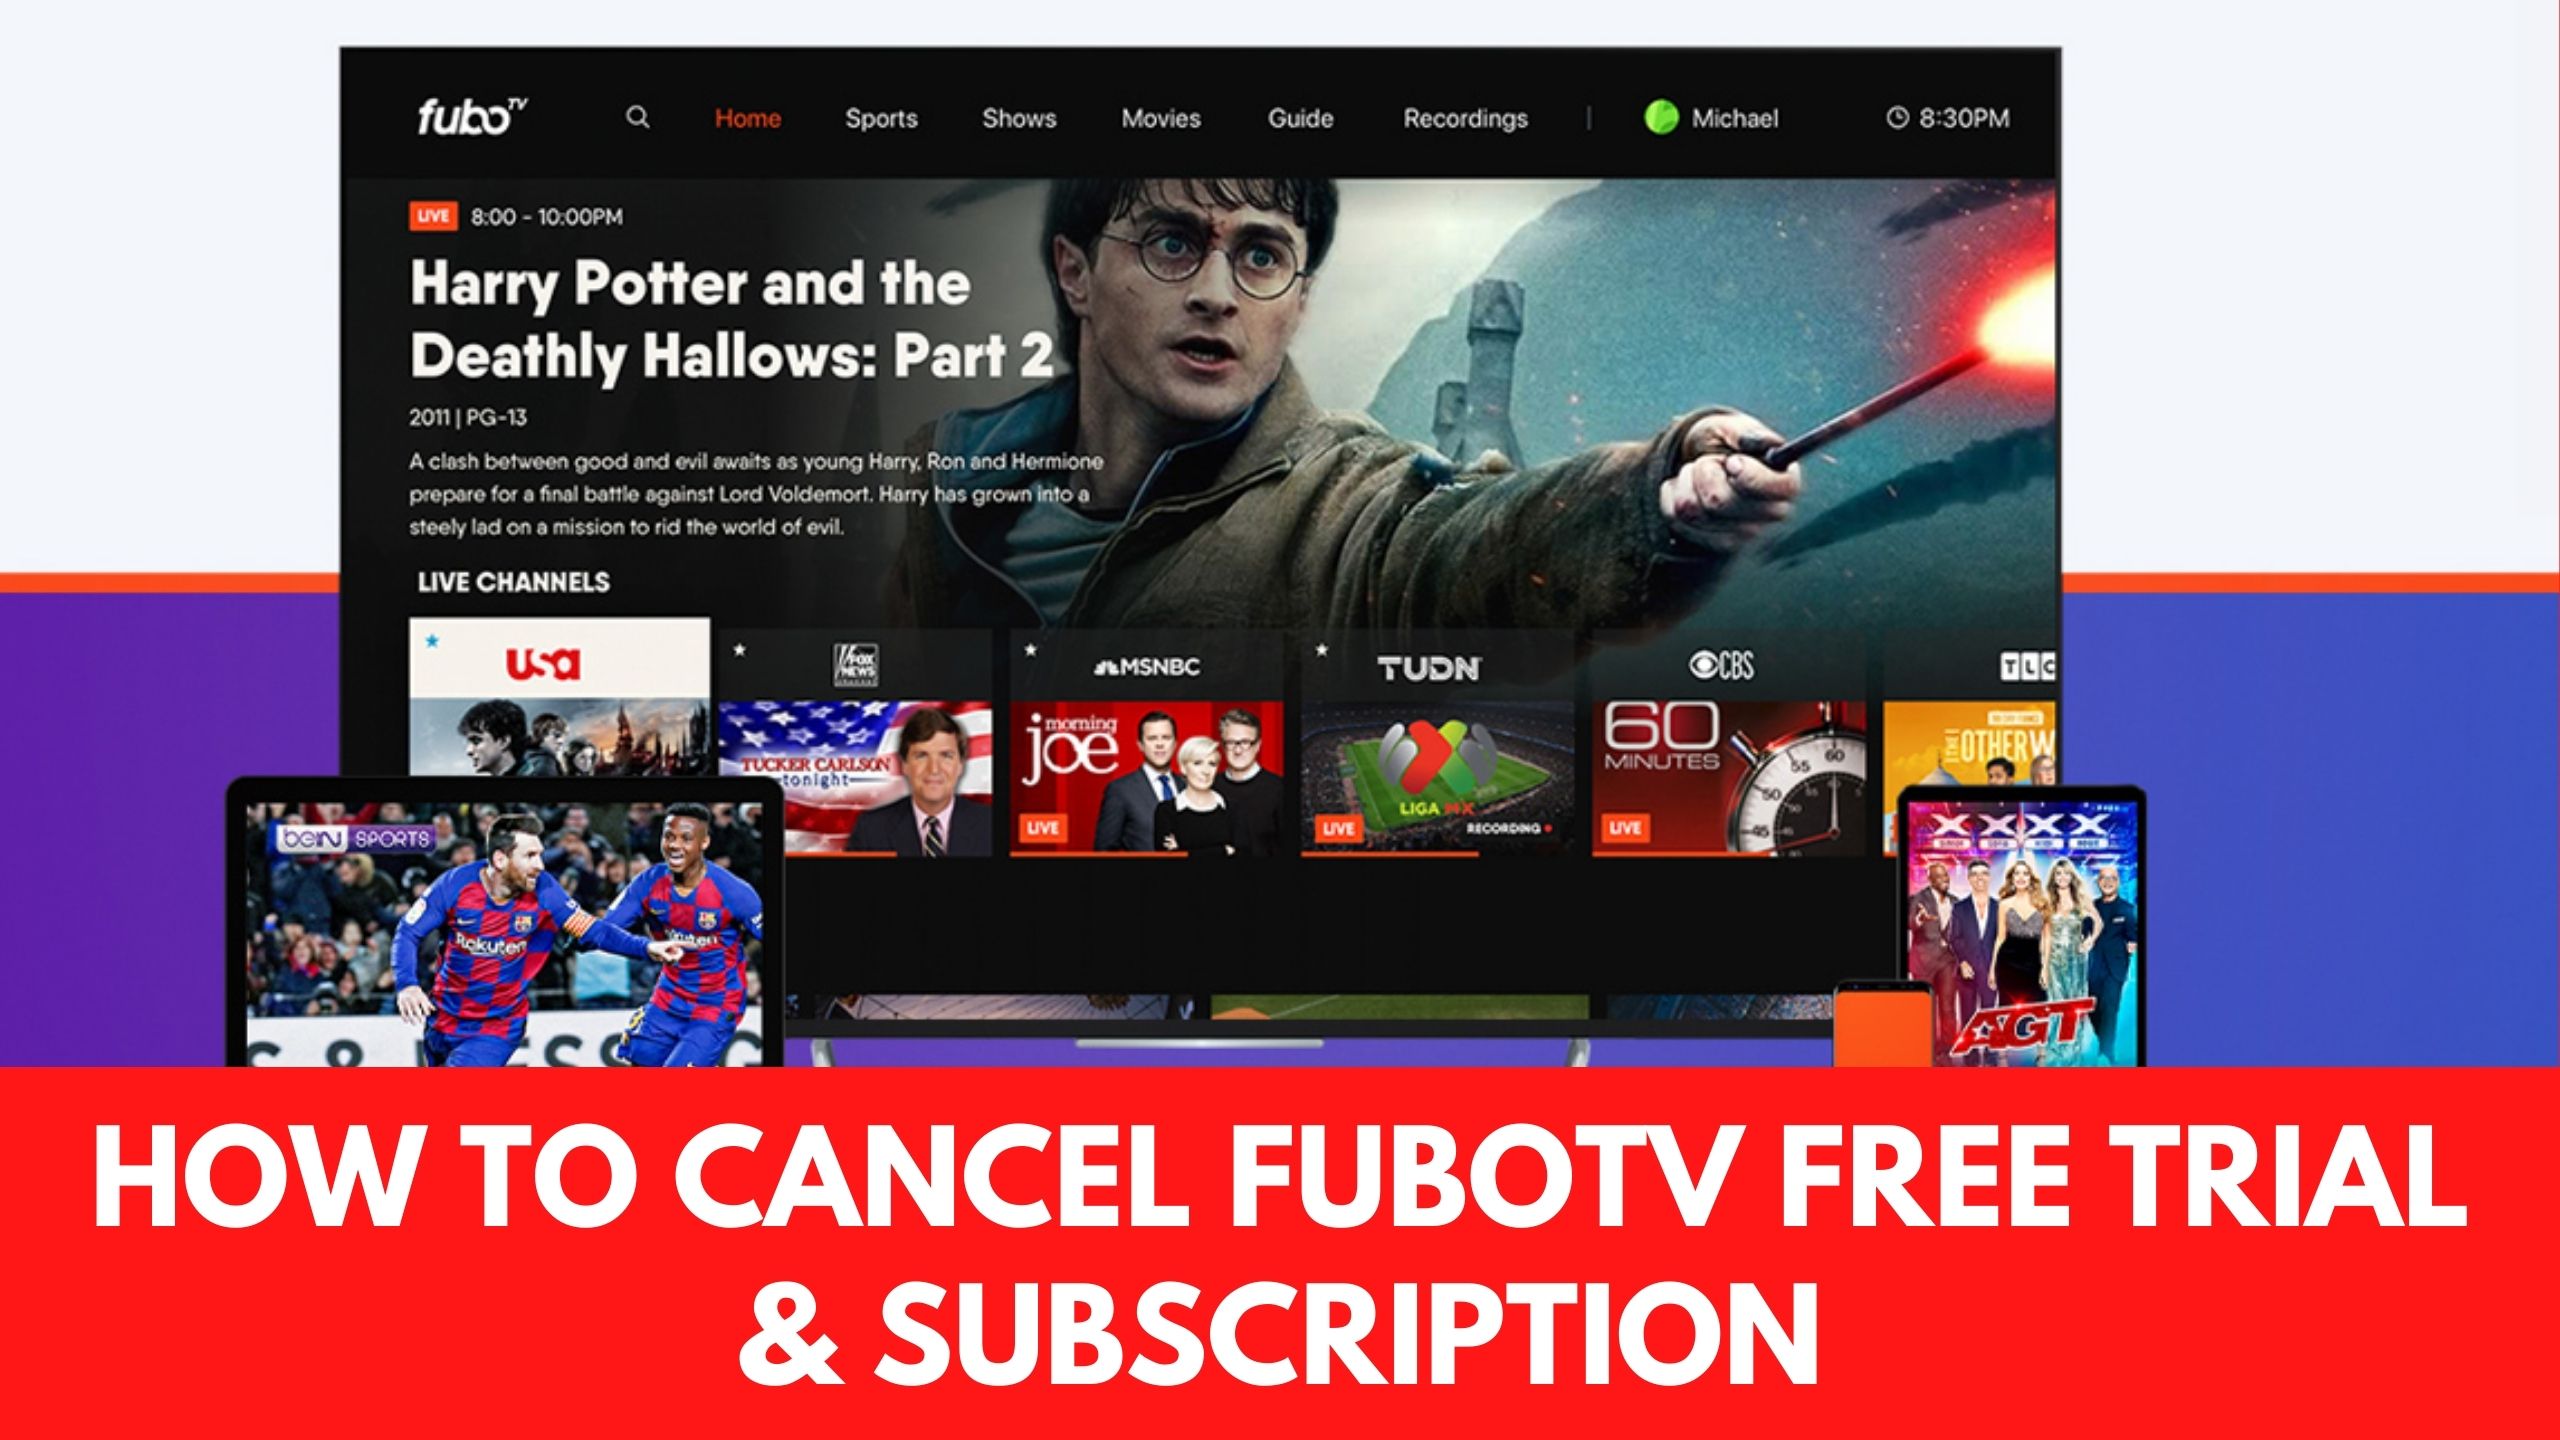 How to Cancel FuboTV Free Trial Subscription